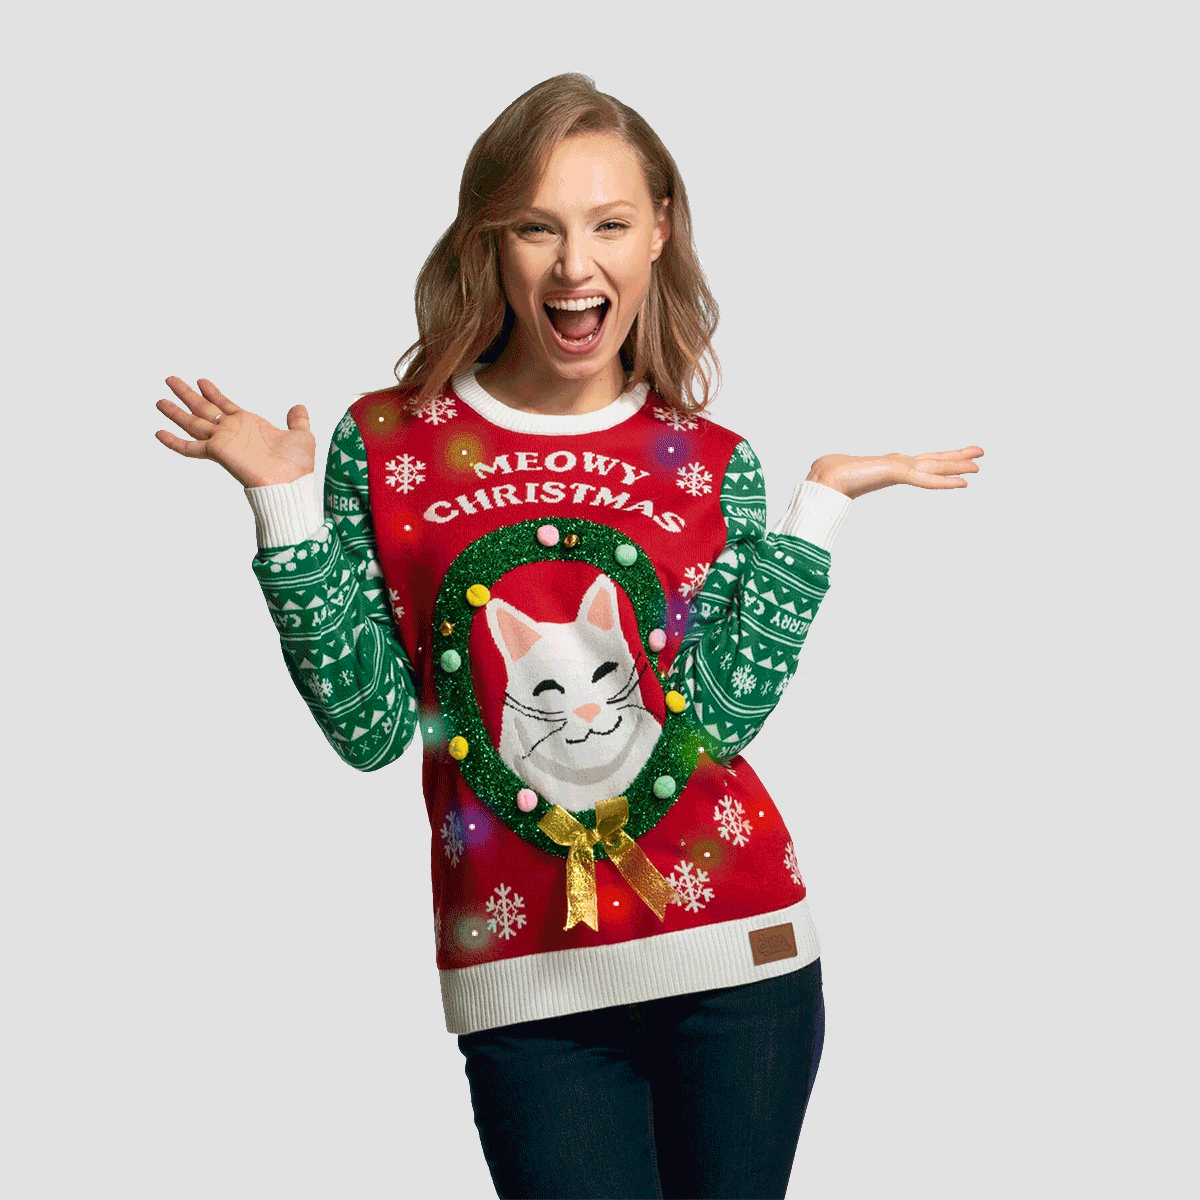 Women's Meowy Christmas Sweater - Europe's largest selection